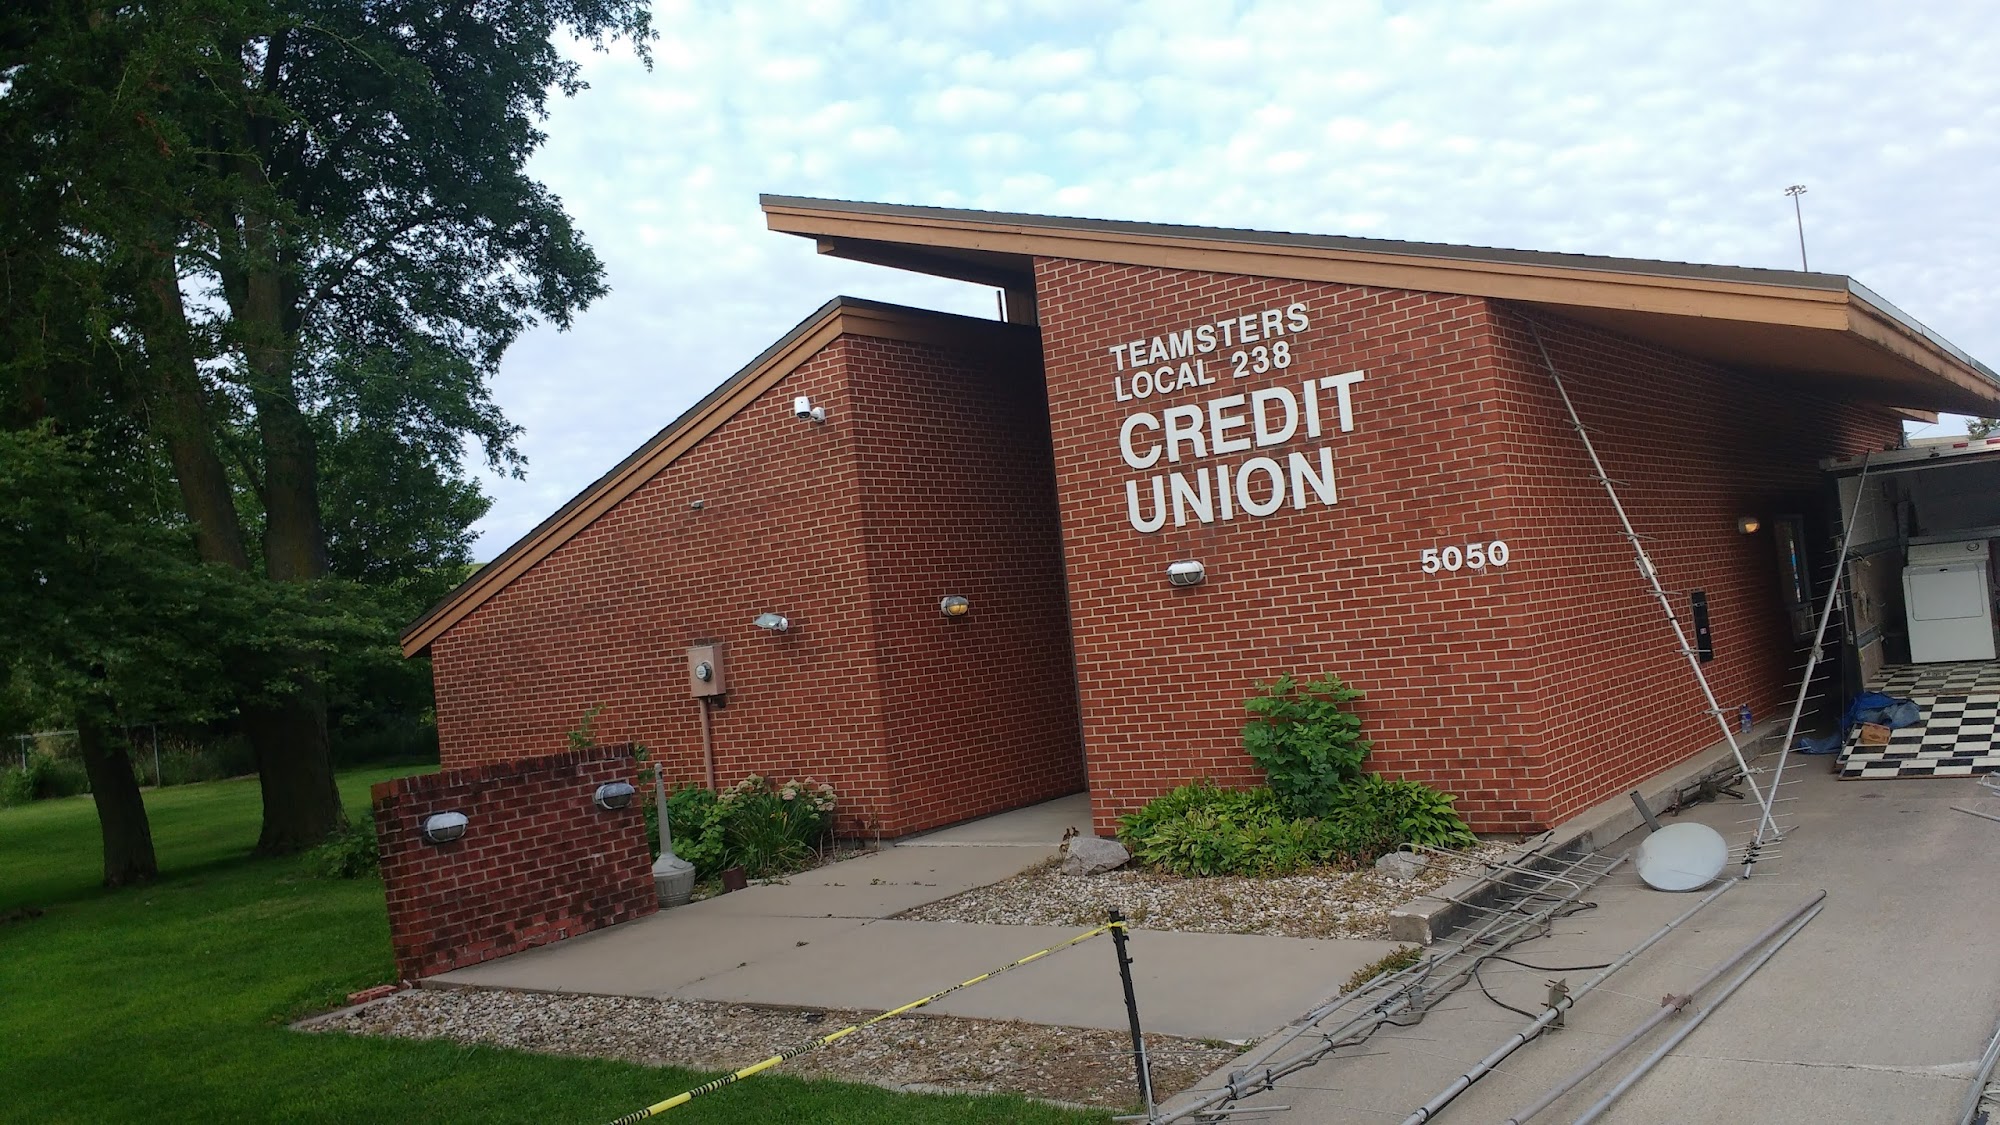 Teamsters 238 Credit Union